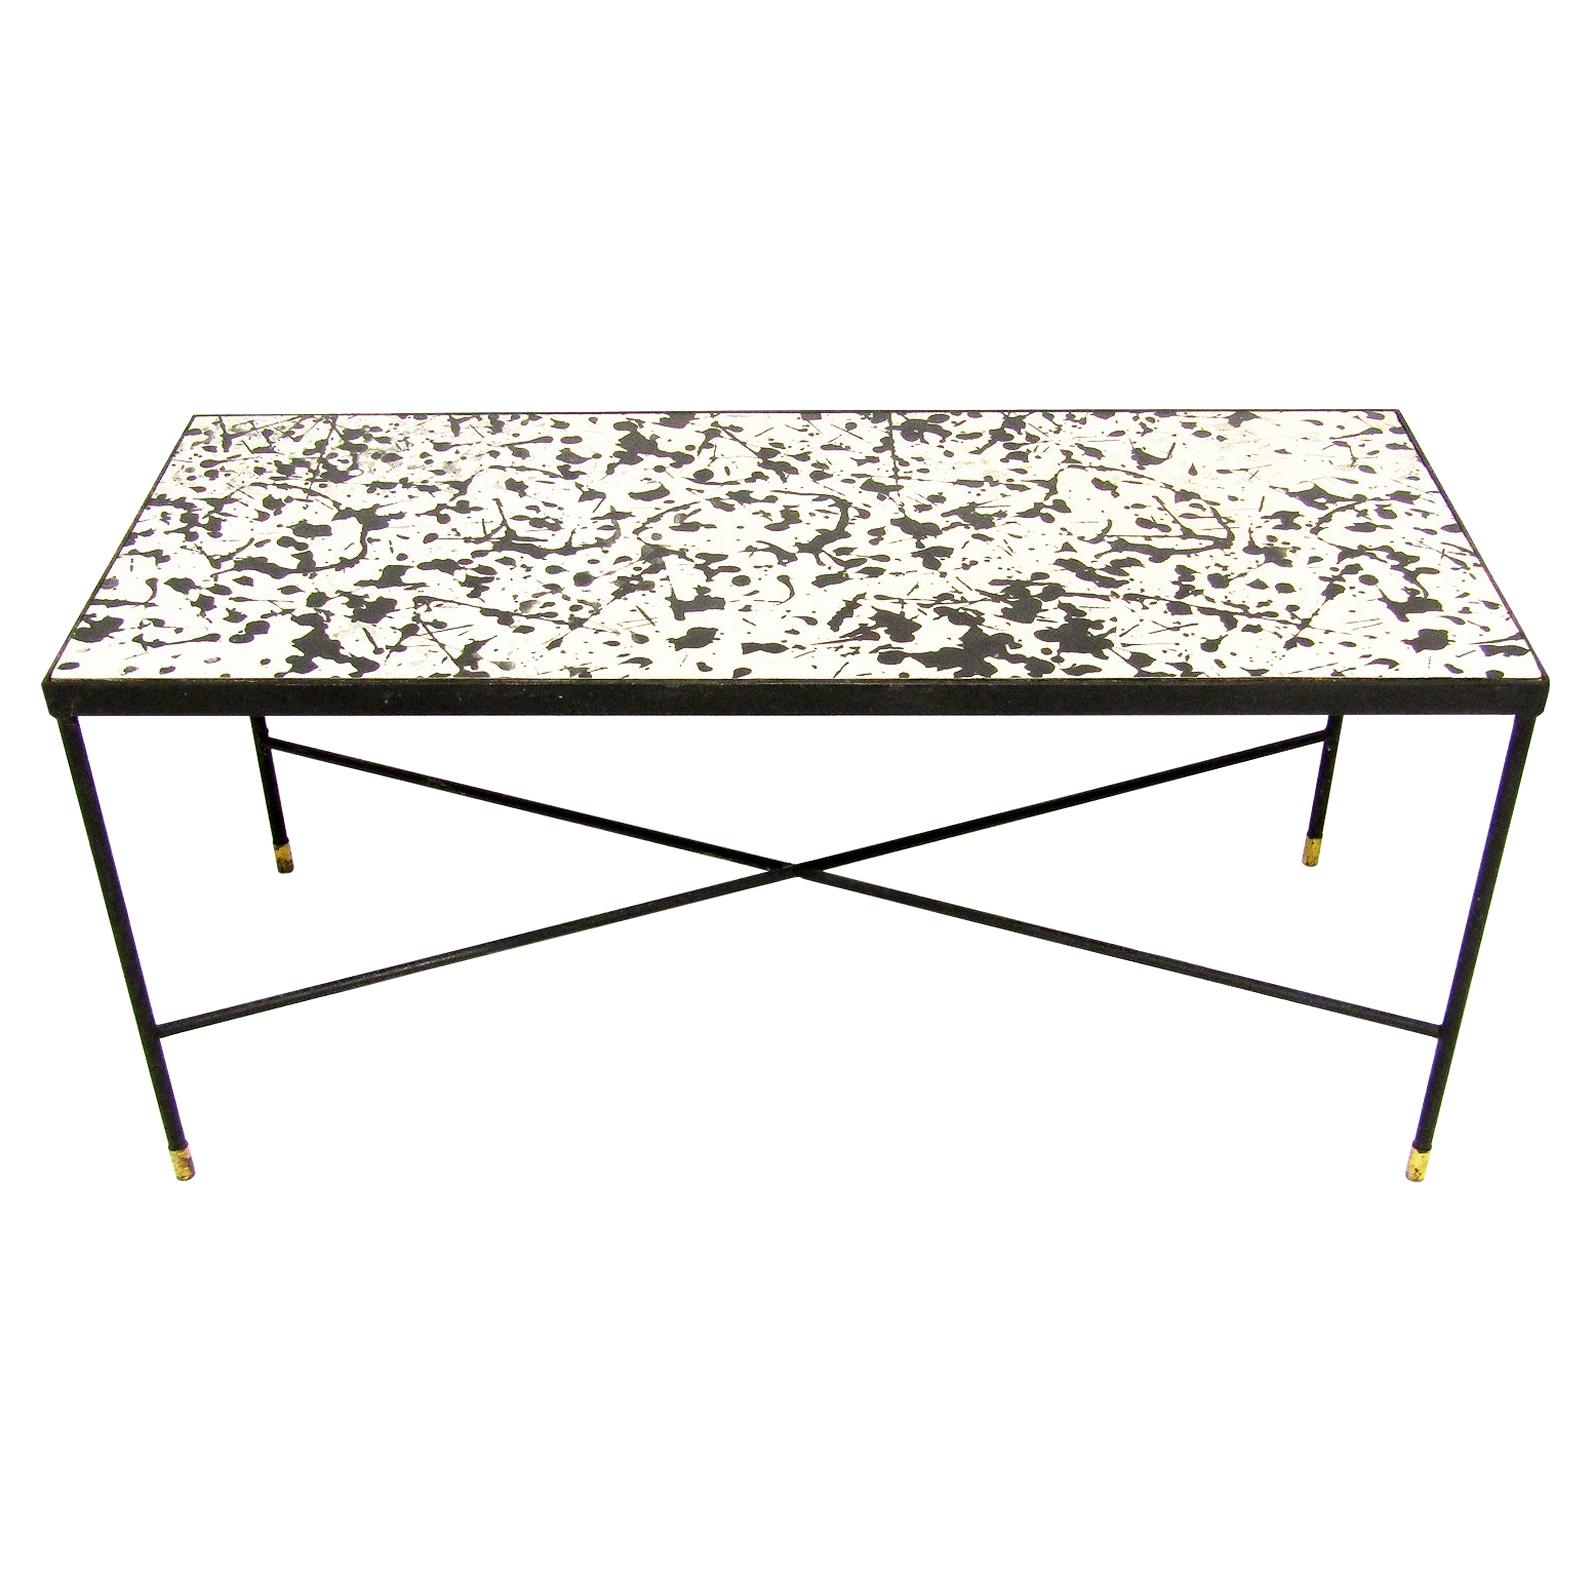 1960s Abstract Coffee Table